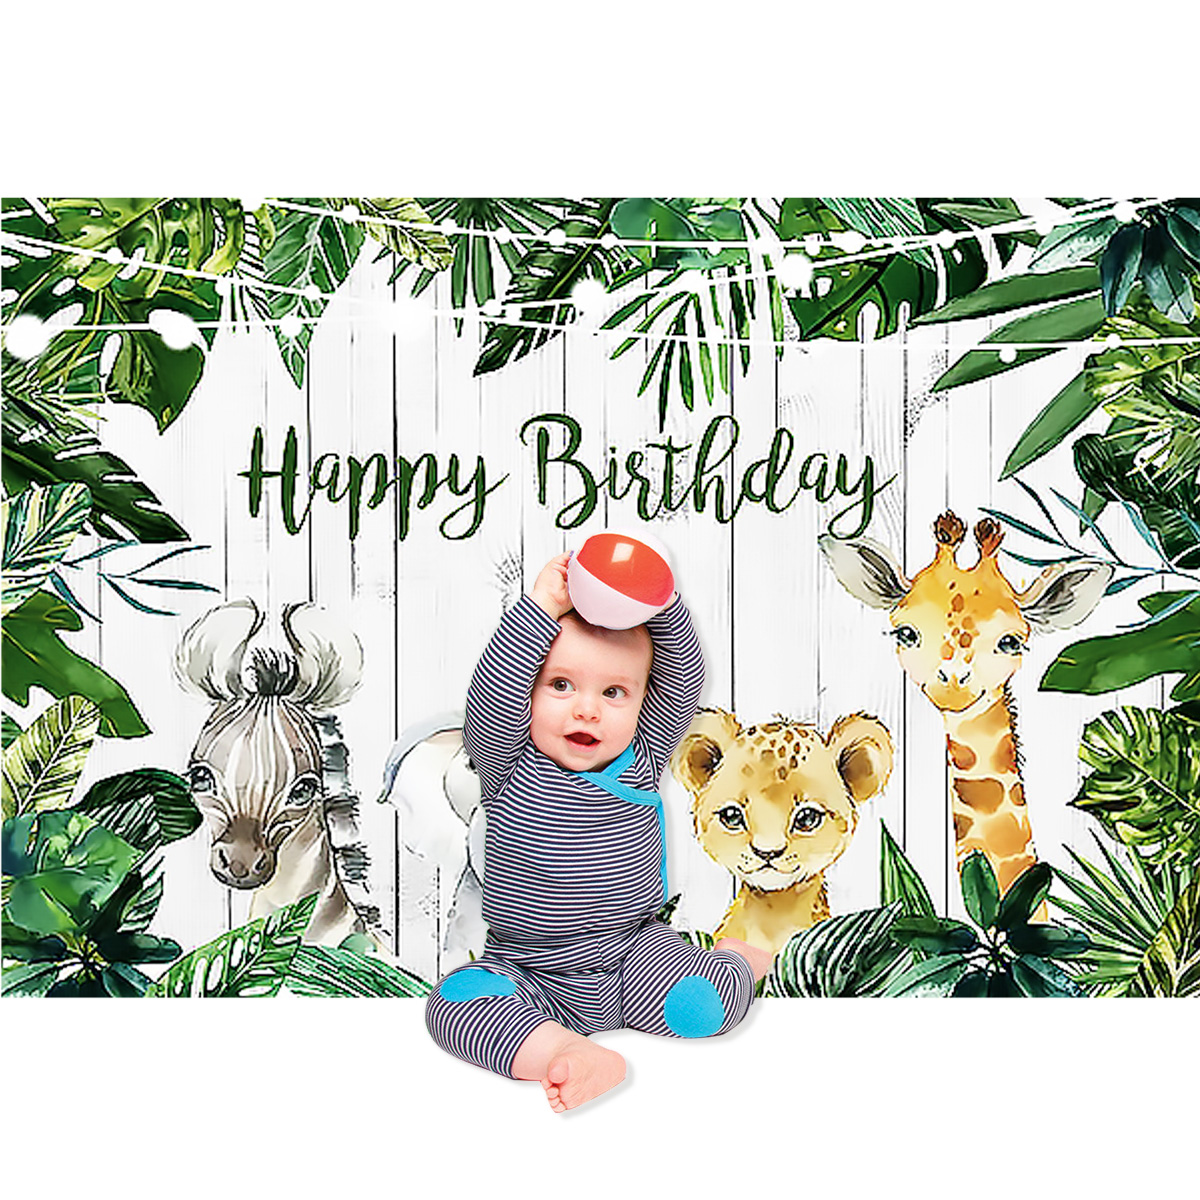 3-Size-Jungle-Green-Forest-Backdrop-Happy-Birthday-Background-Photography-Woodland-Party-Prop-1876181-10